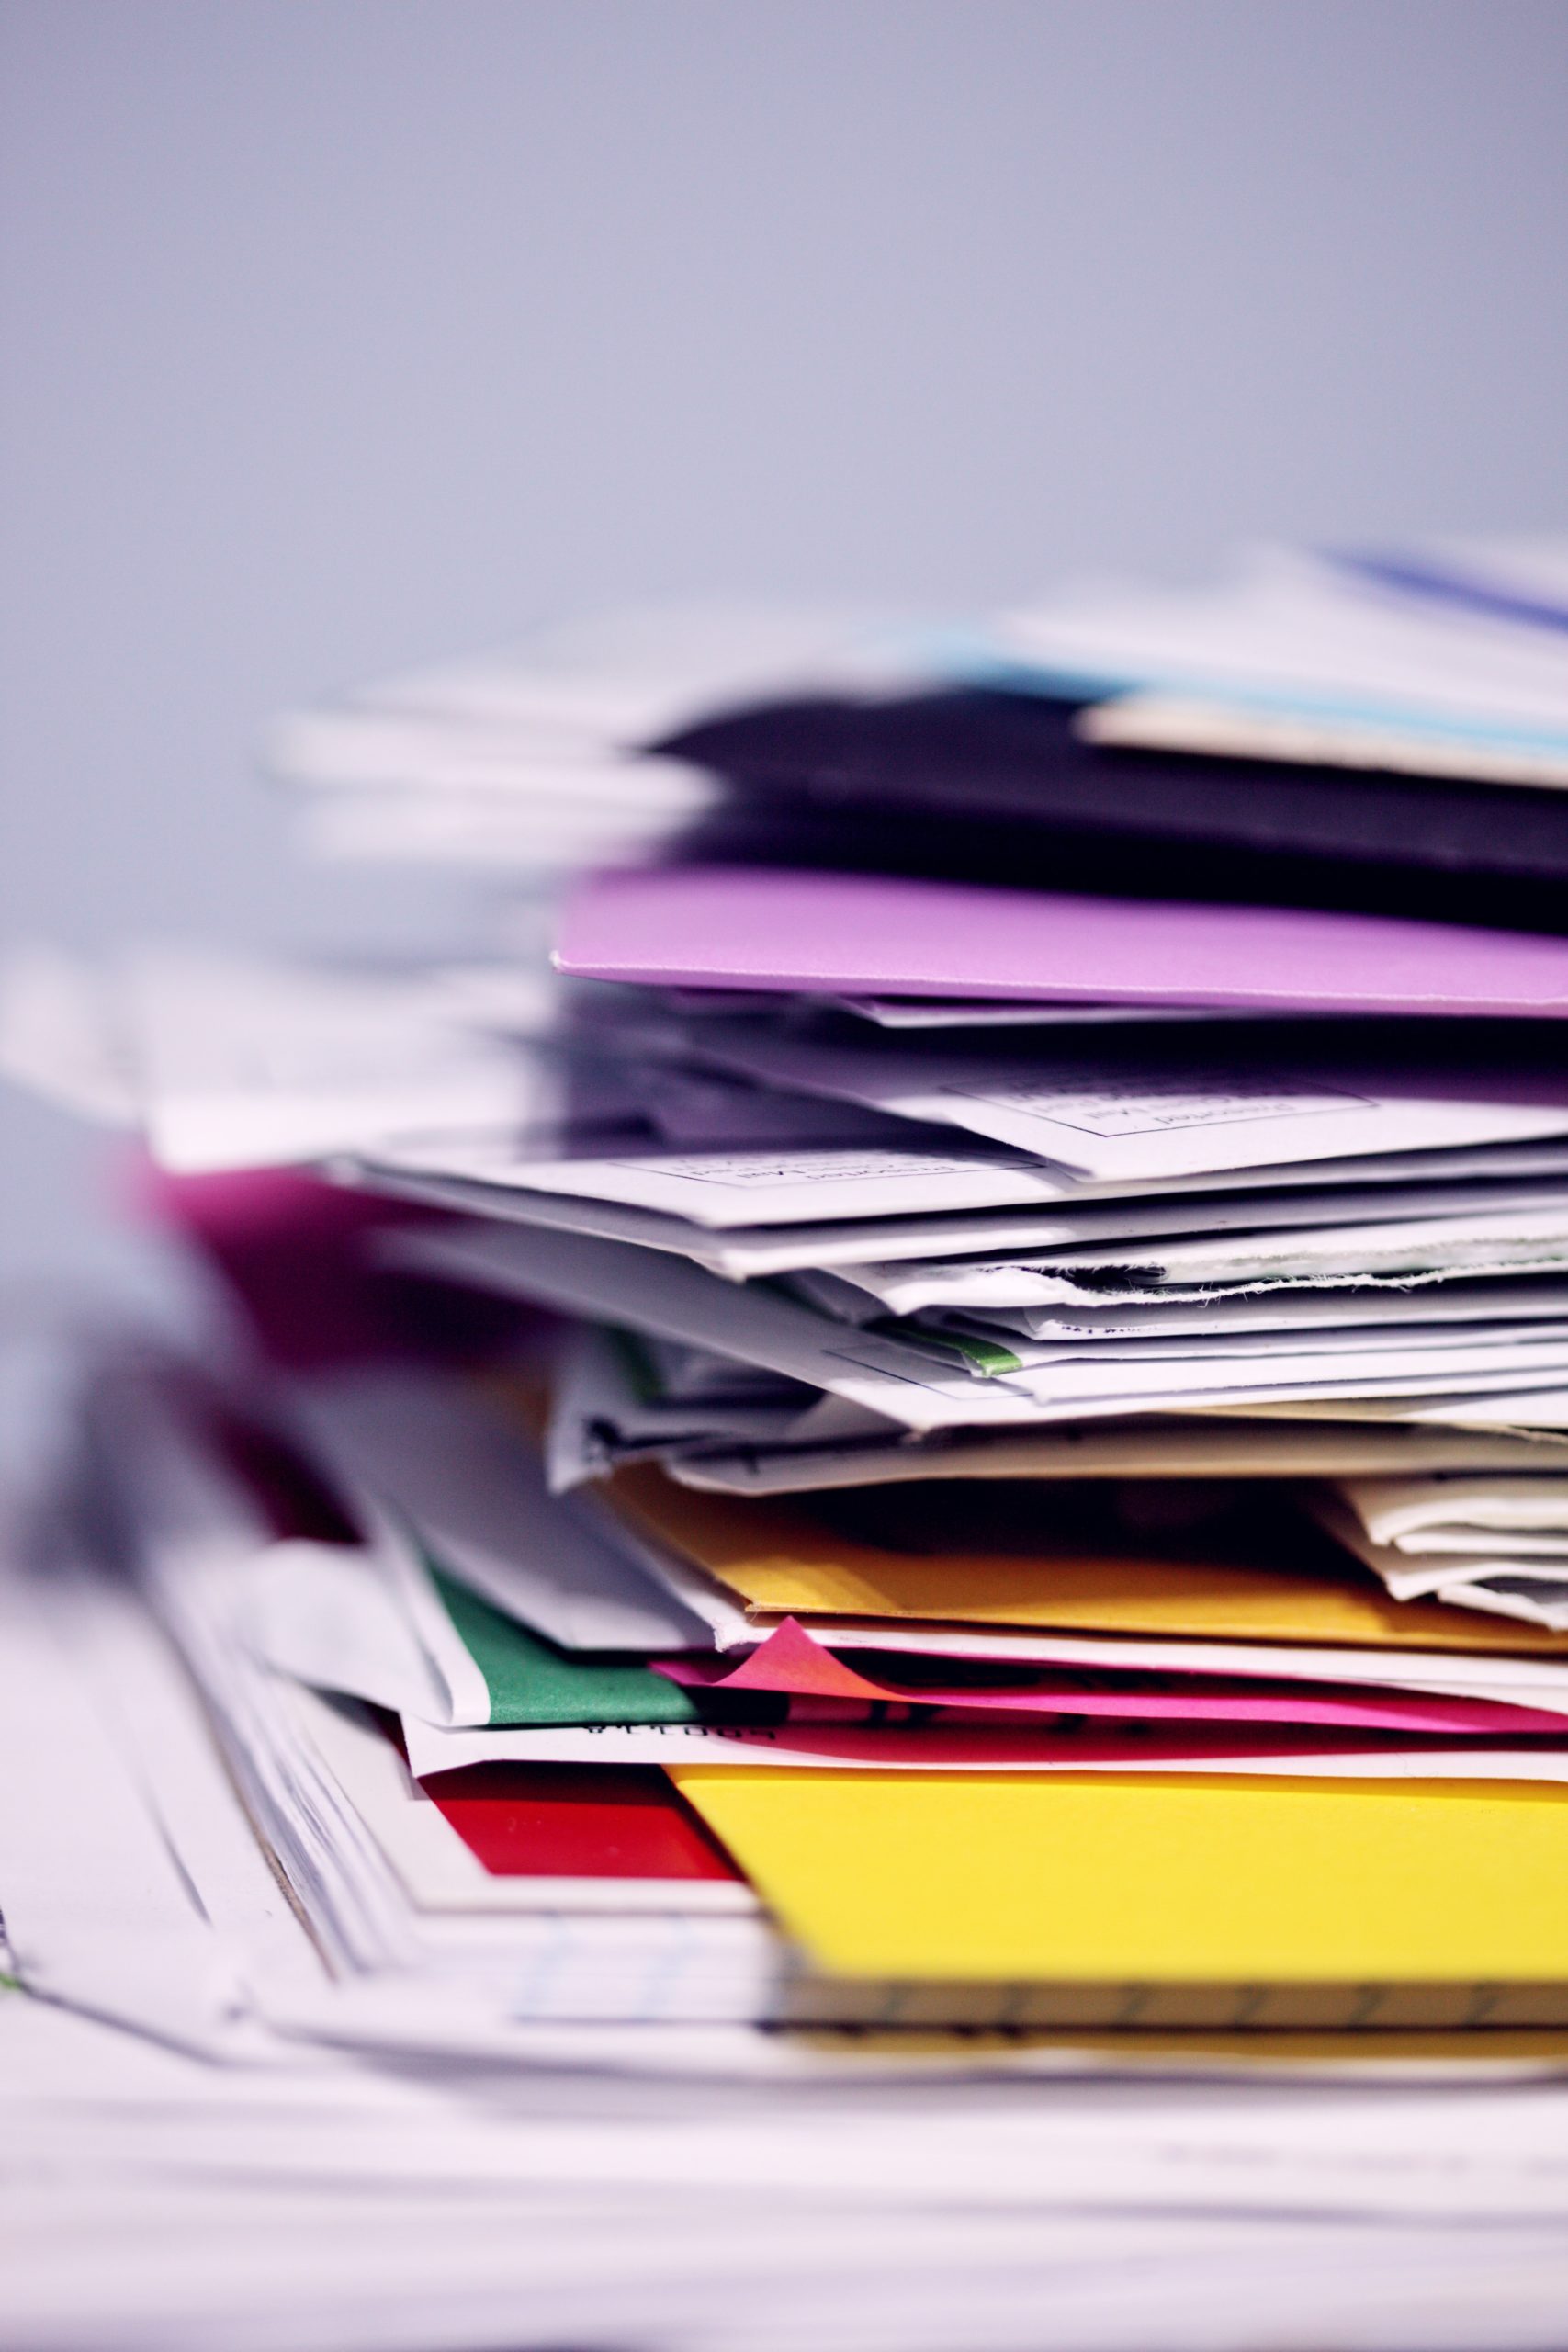 A stack of colorful folders and papers depict many resources.